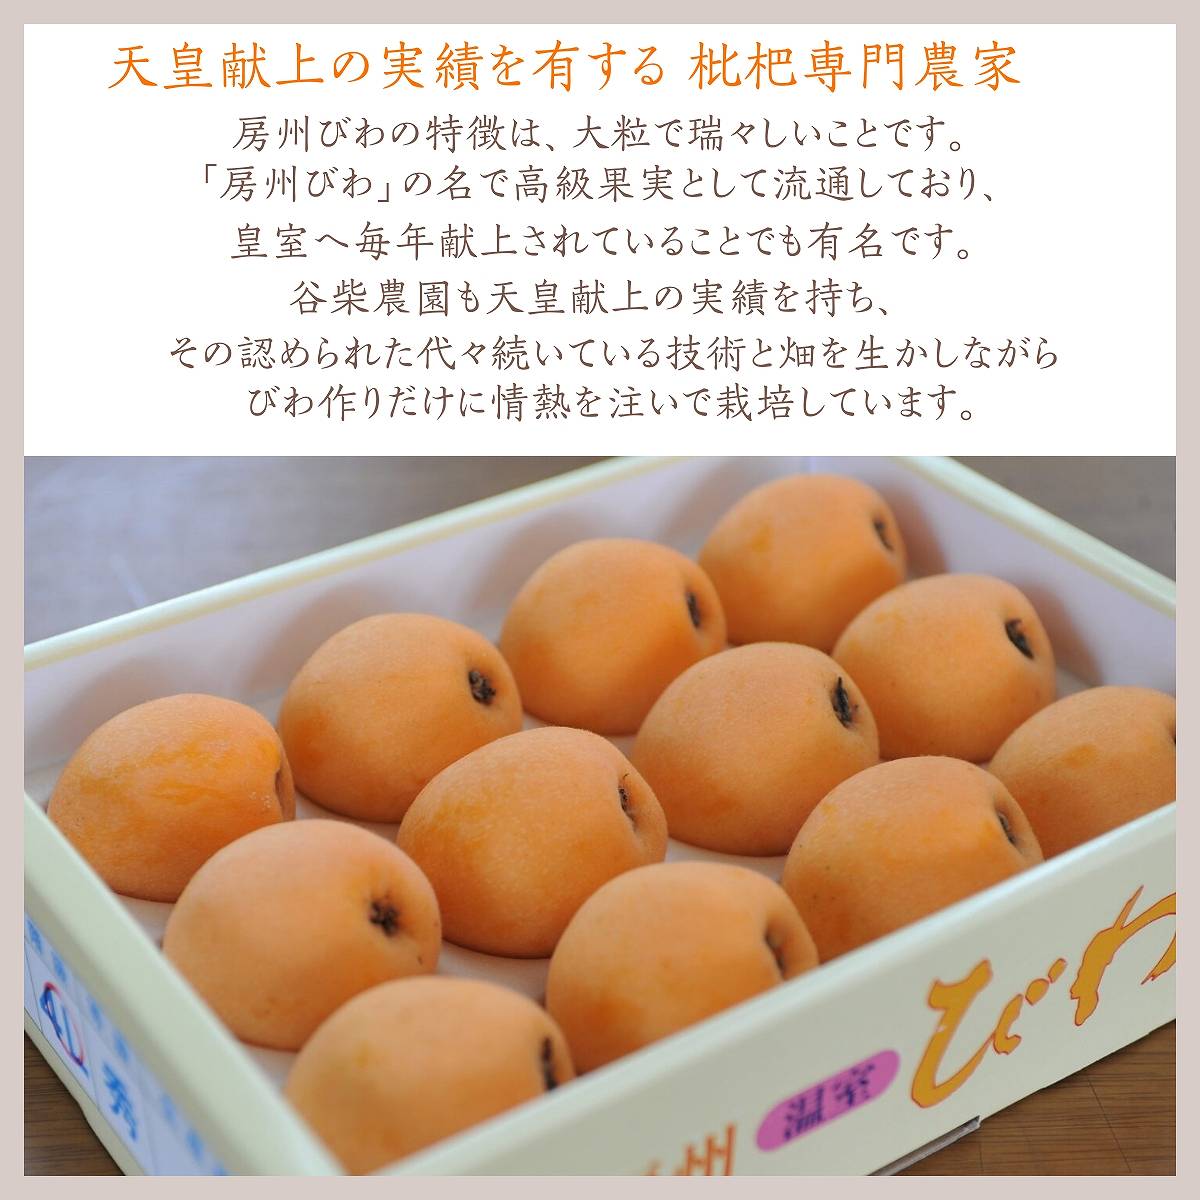  loquat [.. agriculture .].. loquat extra-large 3L 12 piece 1.1kg.. for .. Chiba prefecture south . total city heaven .. on. results Mother's Day Father's day {4/ last third ~5/ on ... shipping }